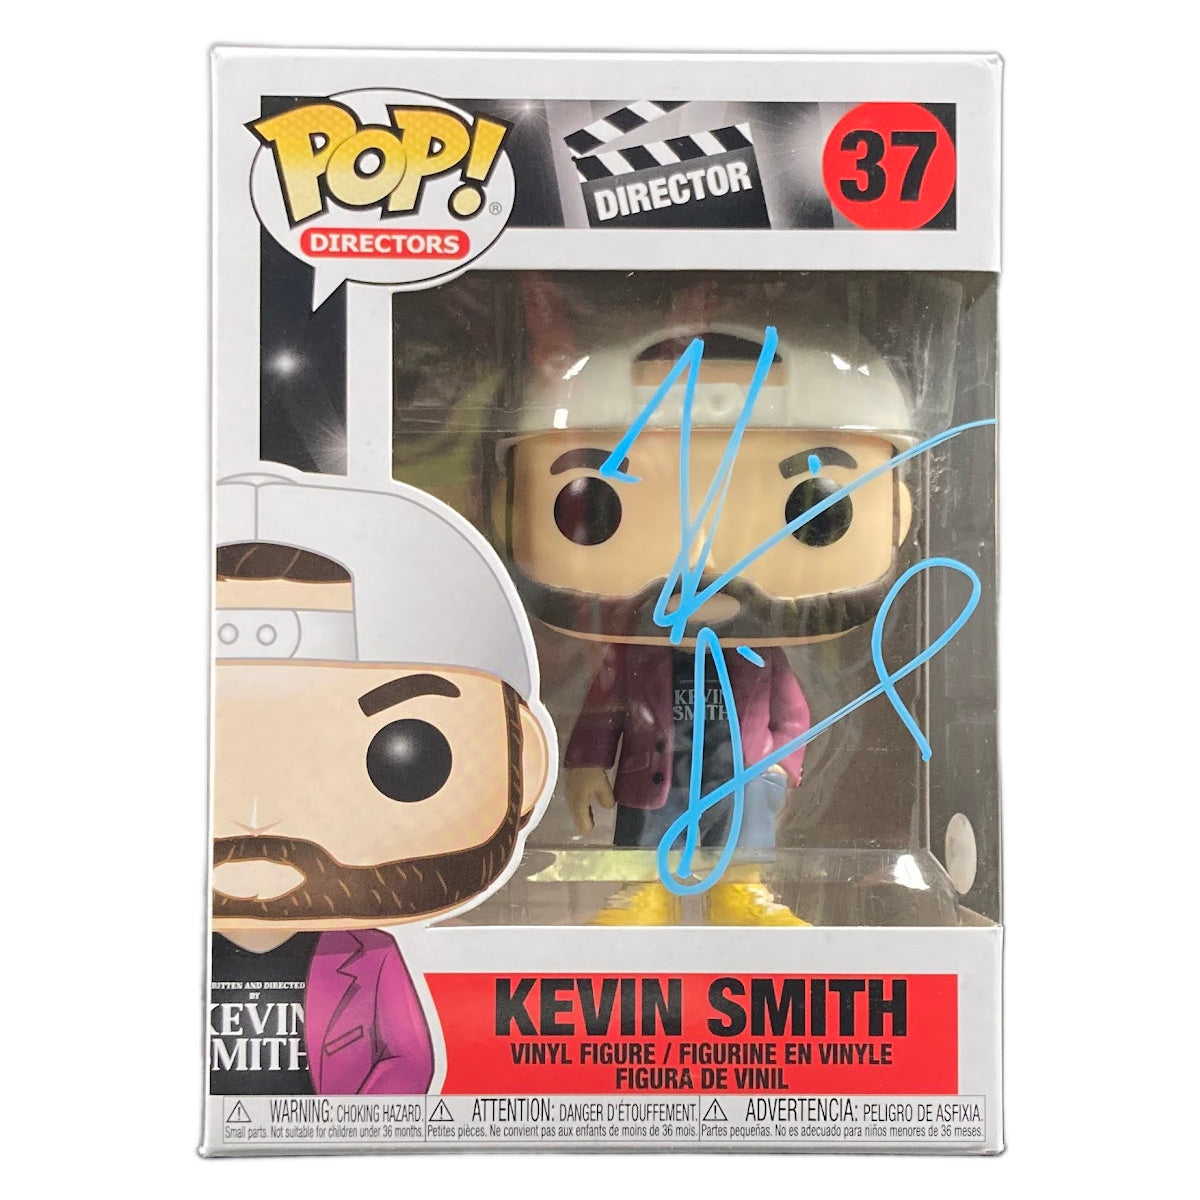 Kevin Smith Signed Funko POP Director Jay & Silent Bob Autographed ACOA 2